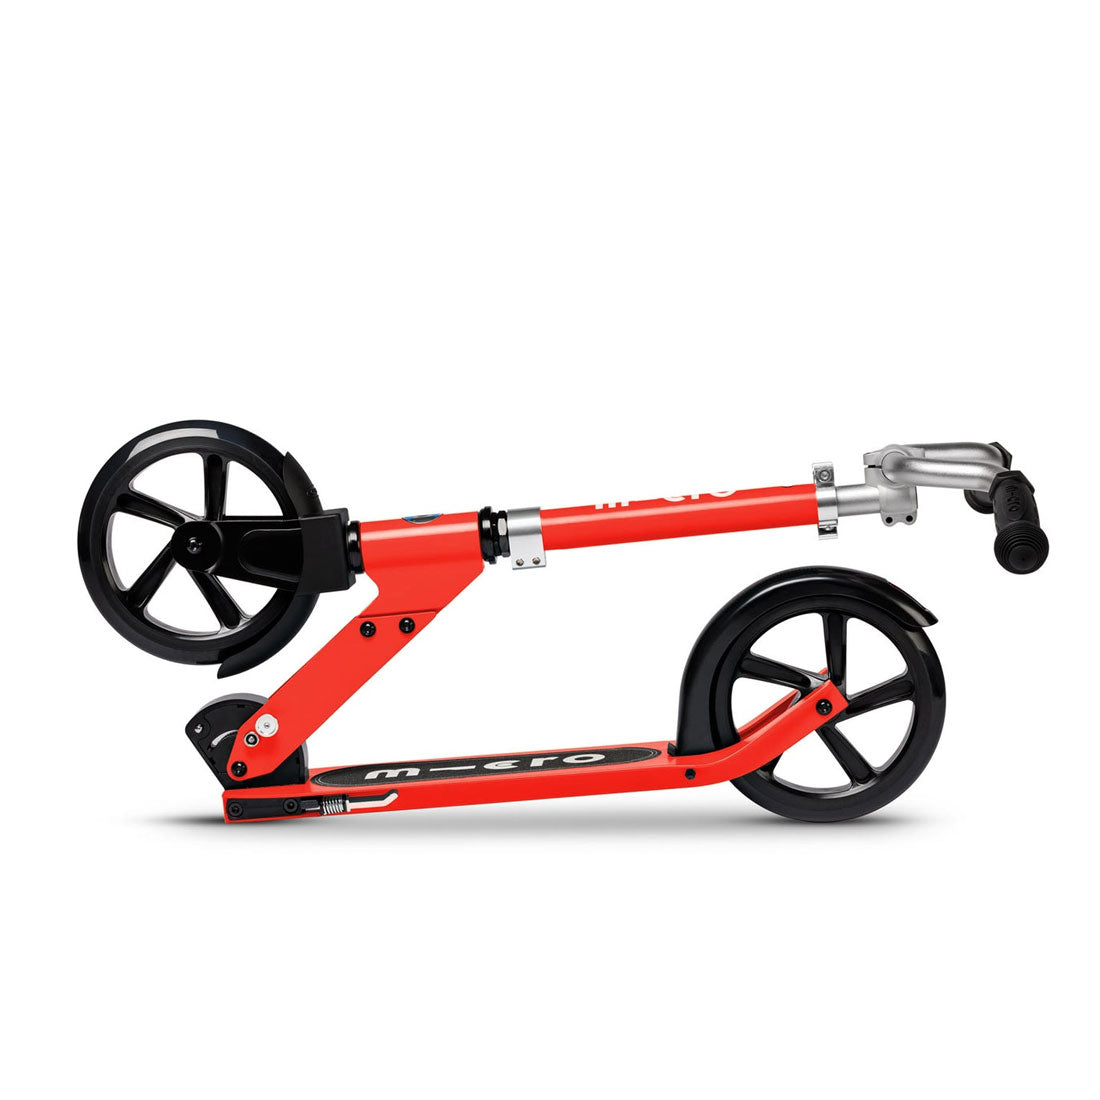 Micro Cruiser Scooter - Red Scooter Completes Rec